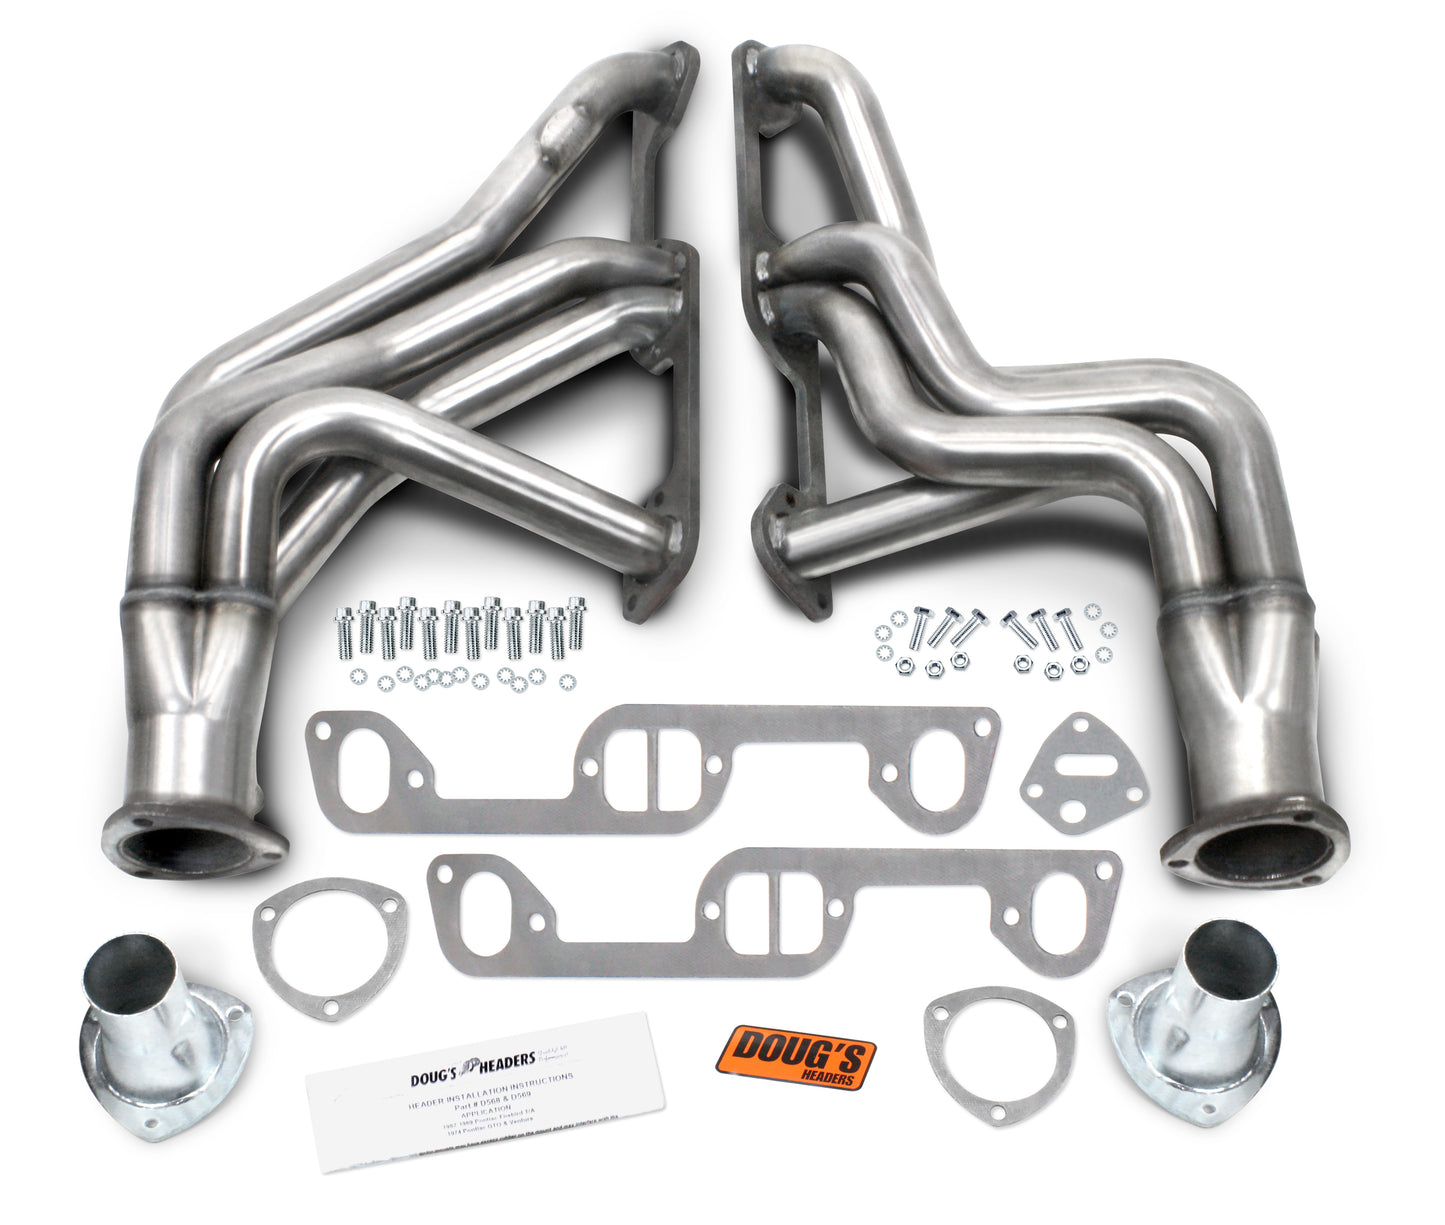 Doug's Headers D569-SS 304 Stainless Long Tube Header 67-69 Firebird 326-455 1 3/4" Primary 3" Collector